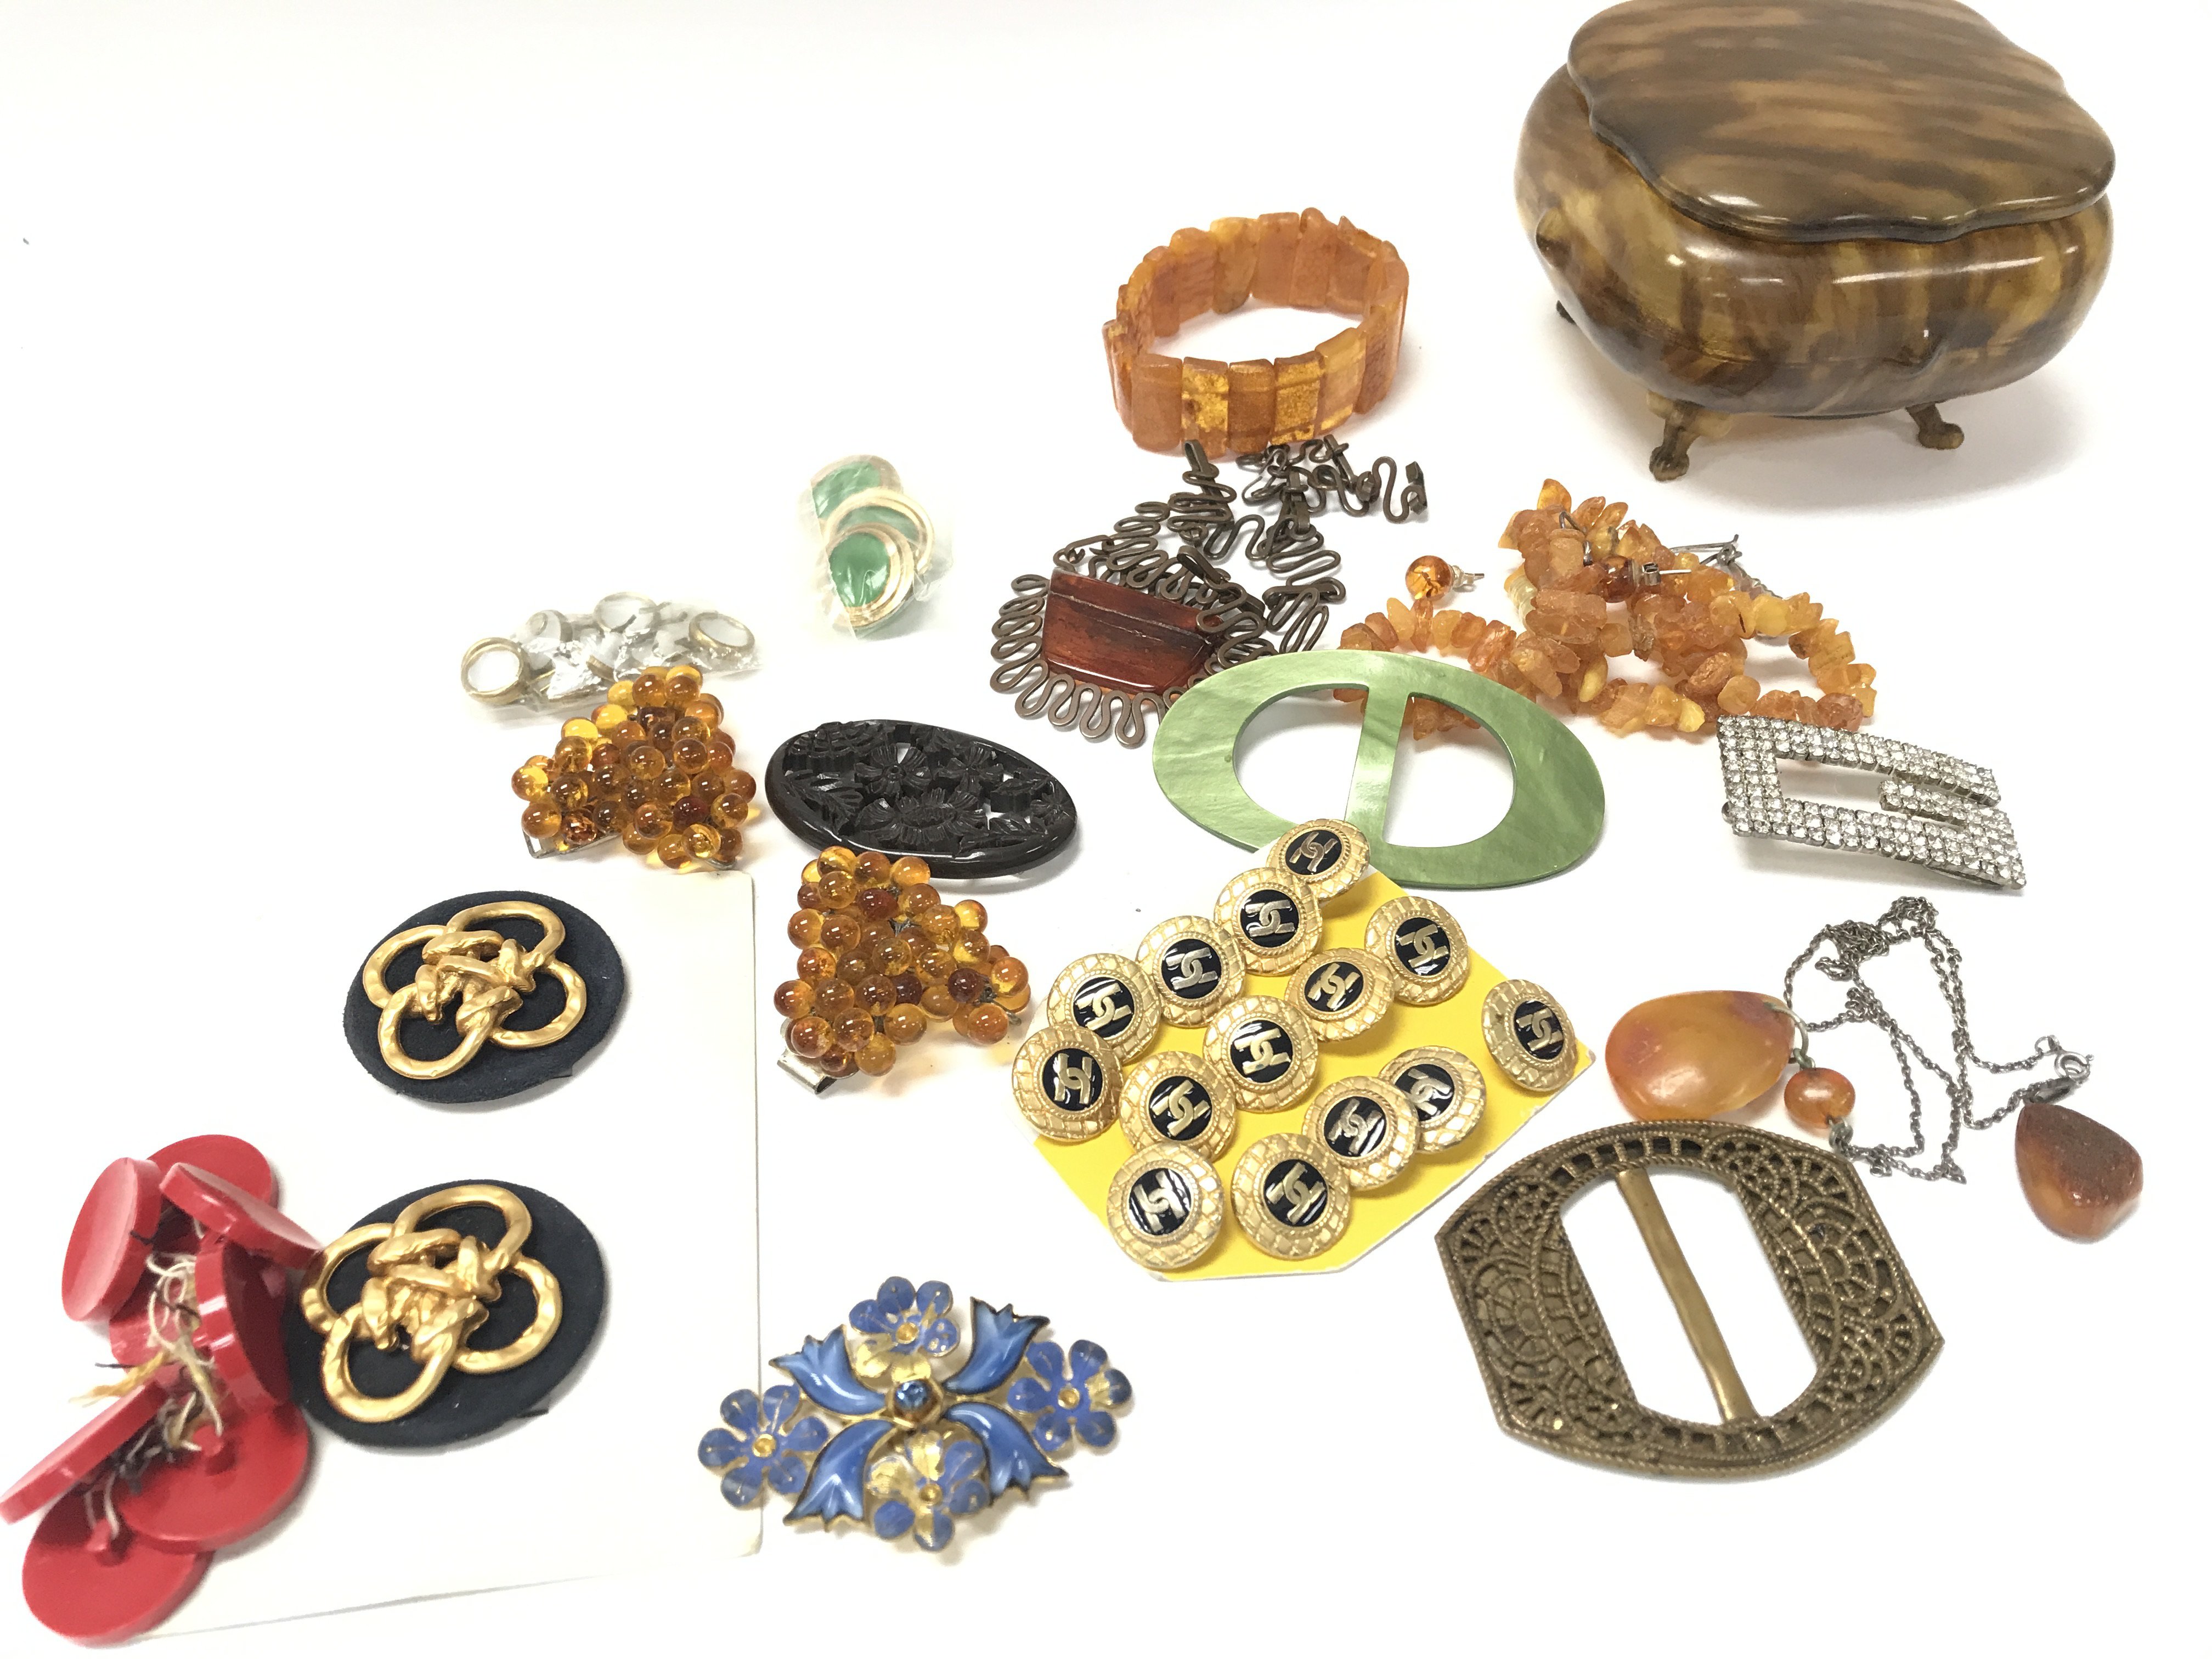 A Collection of vintage buckles and buttons along